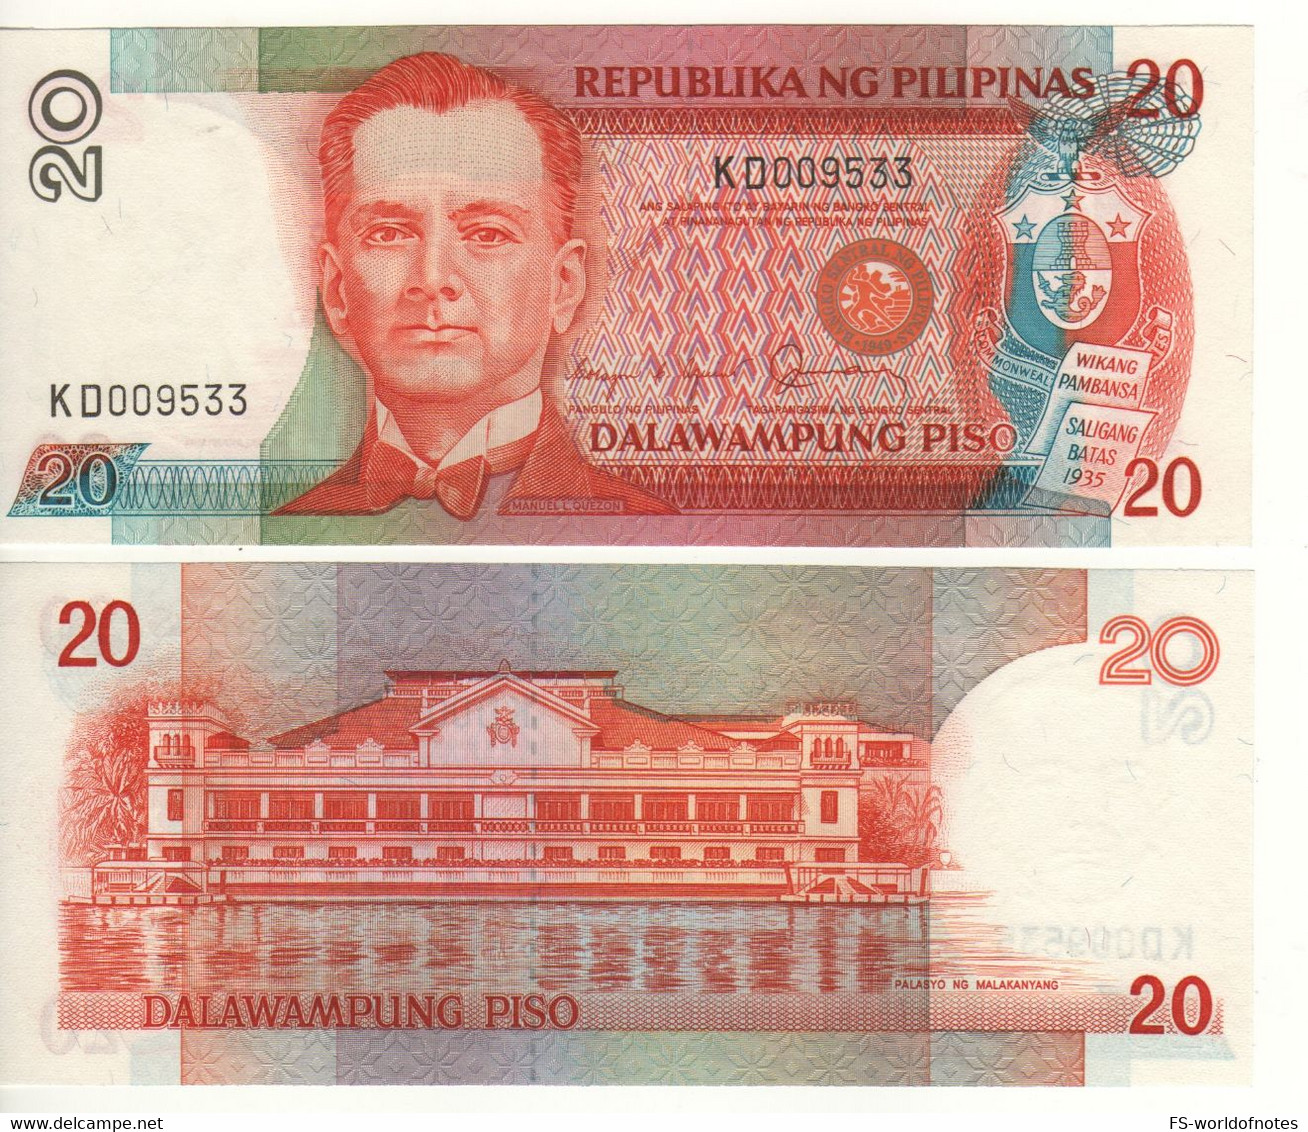 PHILIPPINES  20  Piso     P170b    "ND 1986 Manuel Quezon + Malacañang Palace At Back "   UNC - Philippines